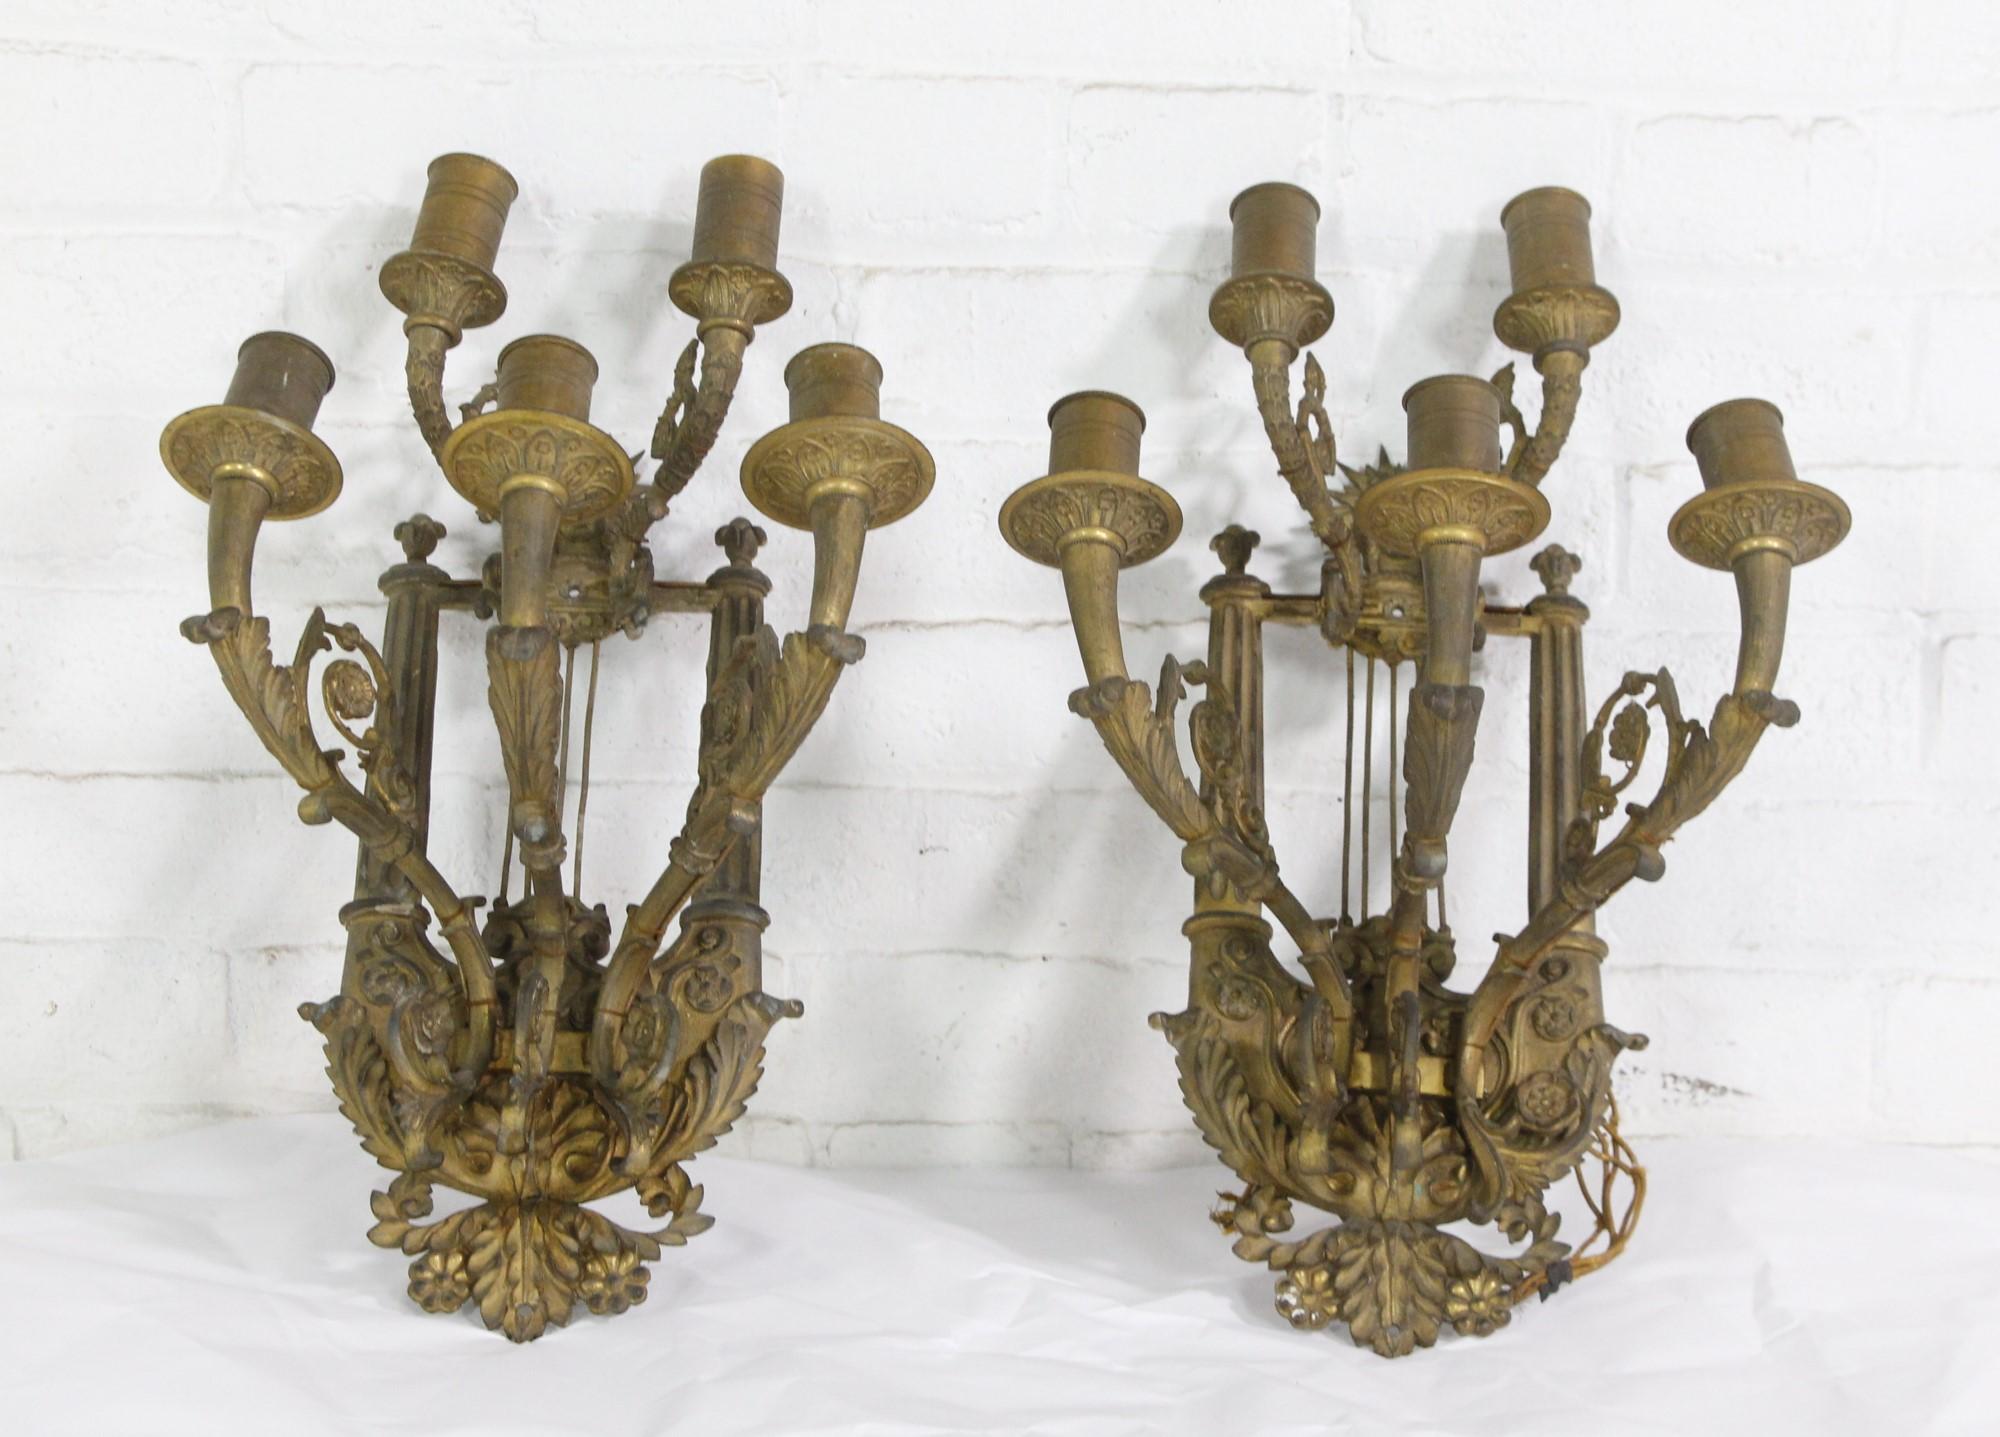 Pair of 19th Century French ornate cast bronze sconces. Featuring five arms each with over the top intricate detail. Shown here as is. Price includes restoration. Priced as a pair.